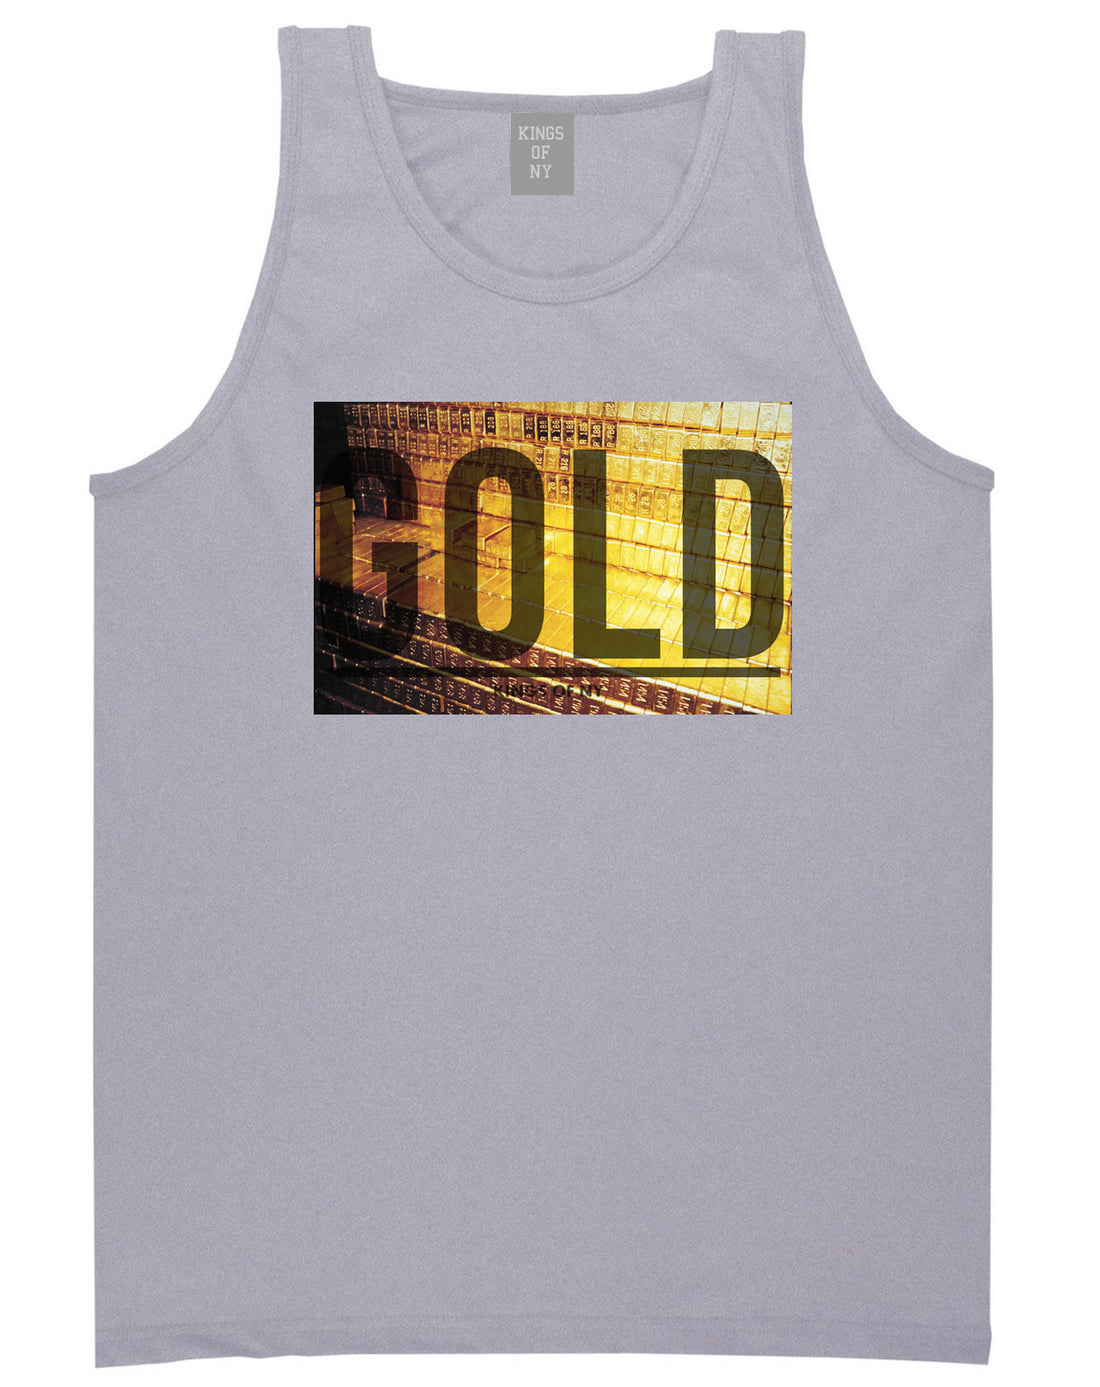 Gold Bricks Money Luxury Bank Cash Tank Top In Grey by Kings Of NY